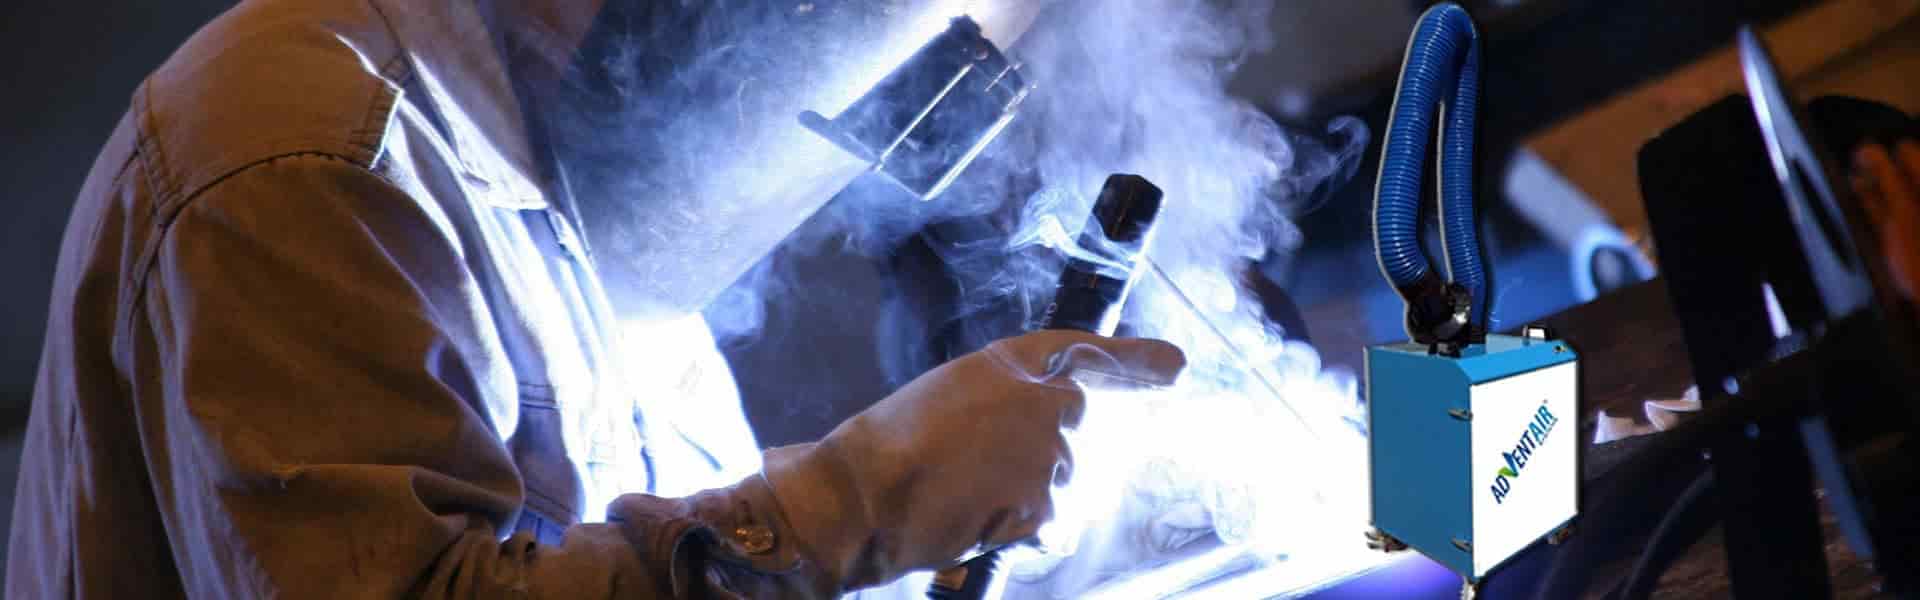 welding smoke extraction systems